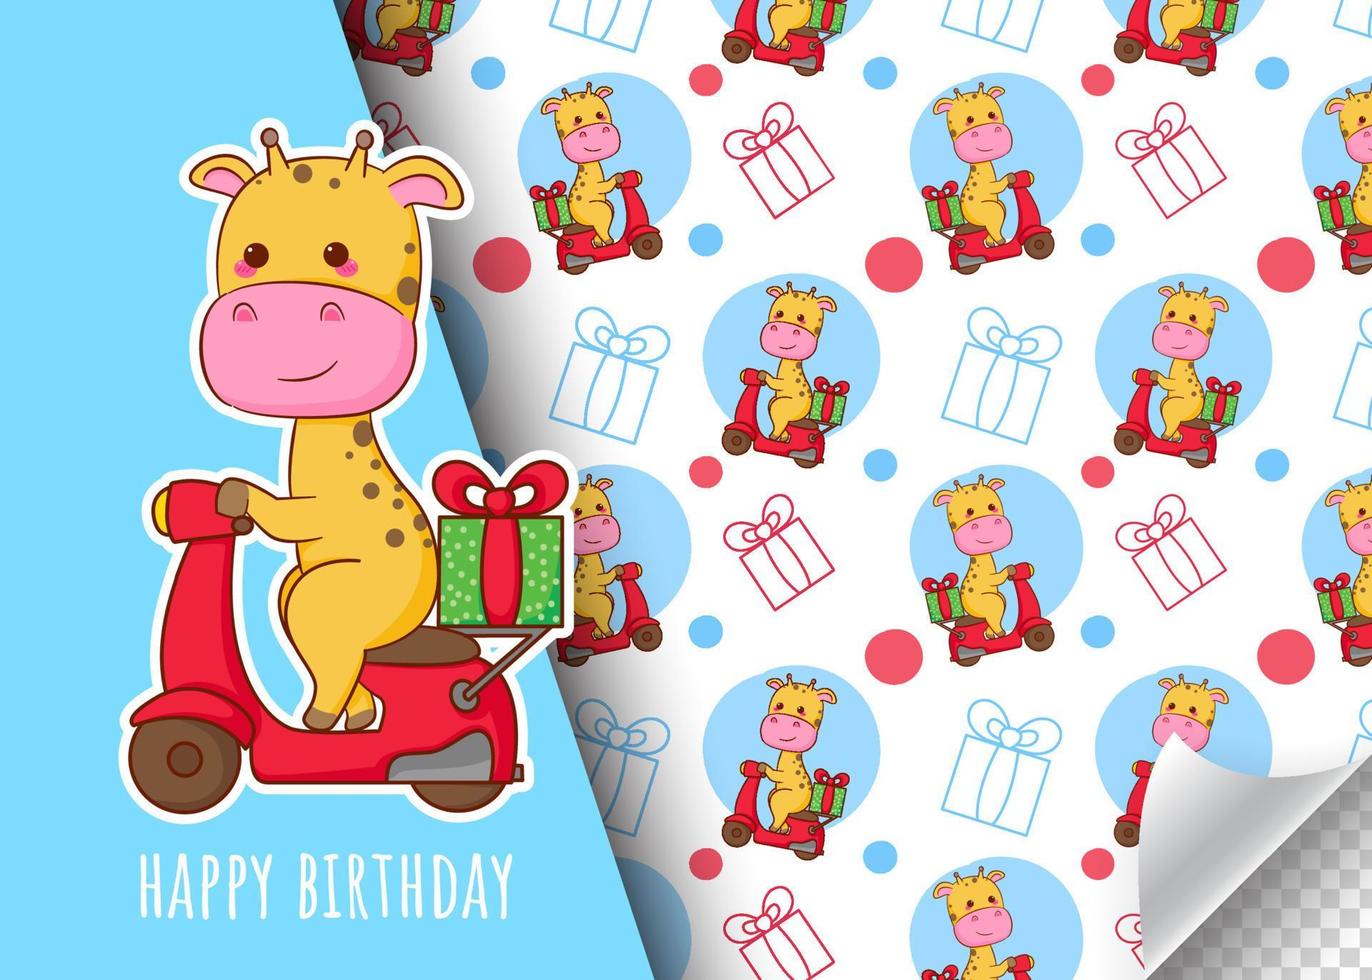 Cute cartoon giraffe character riding motorcycle. Kids card and seamless background pattern. Hand drawn design vector illustration.